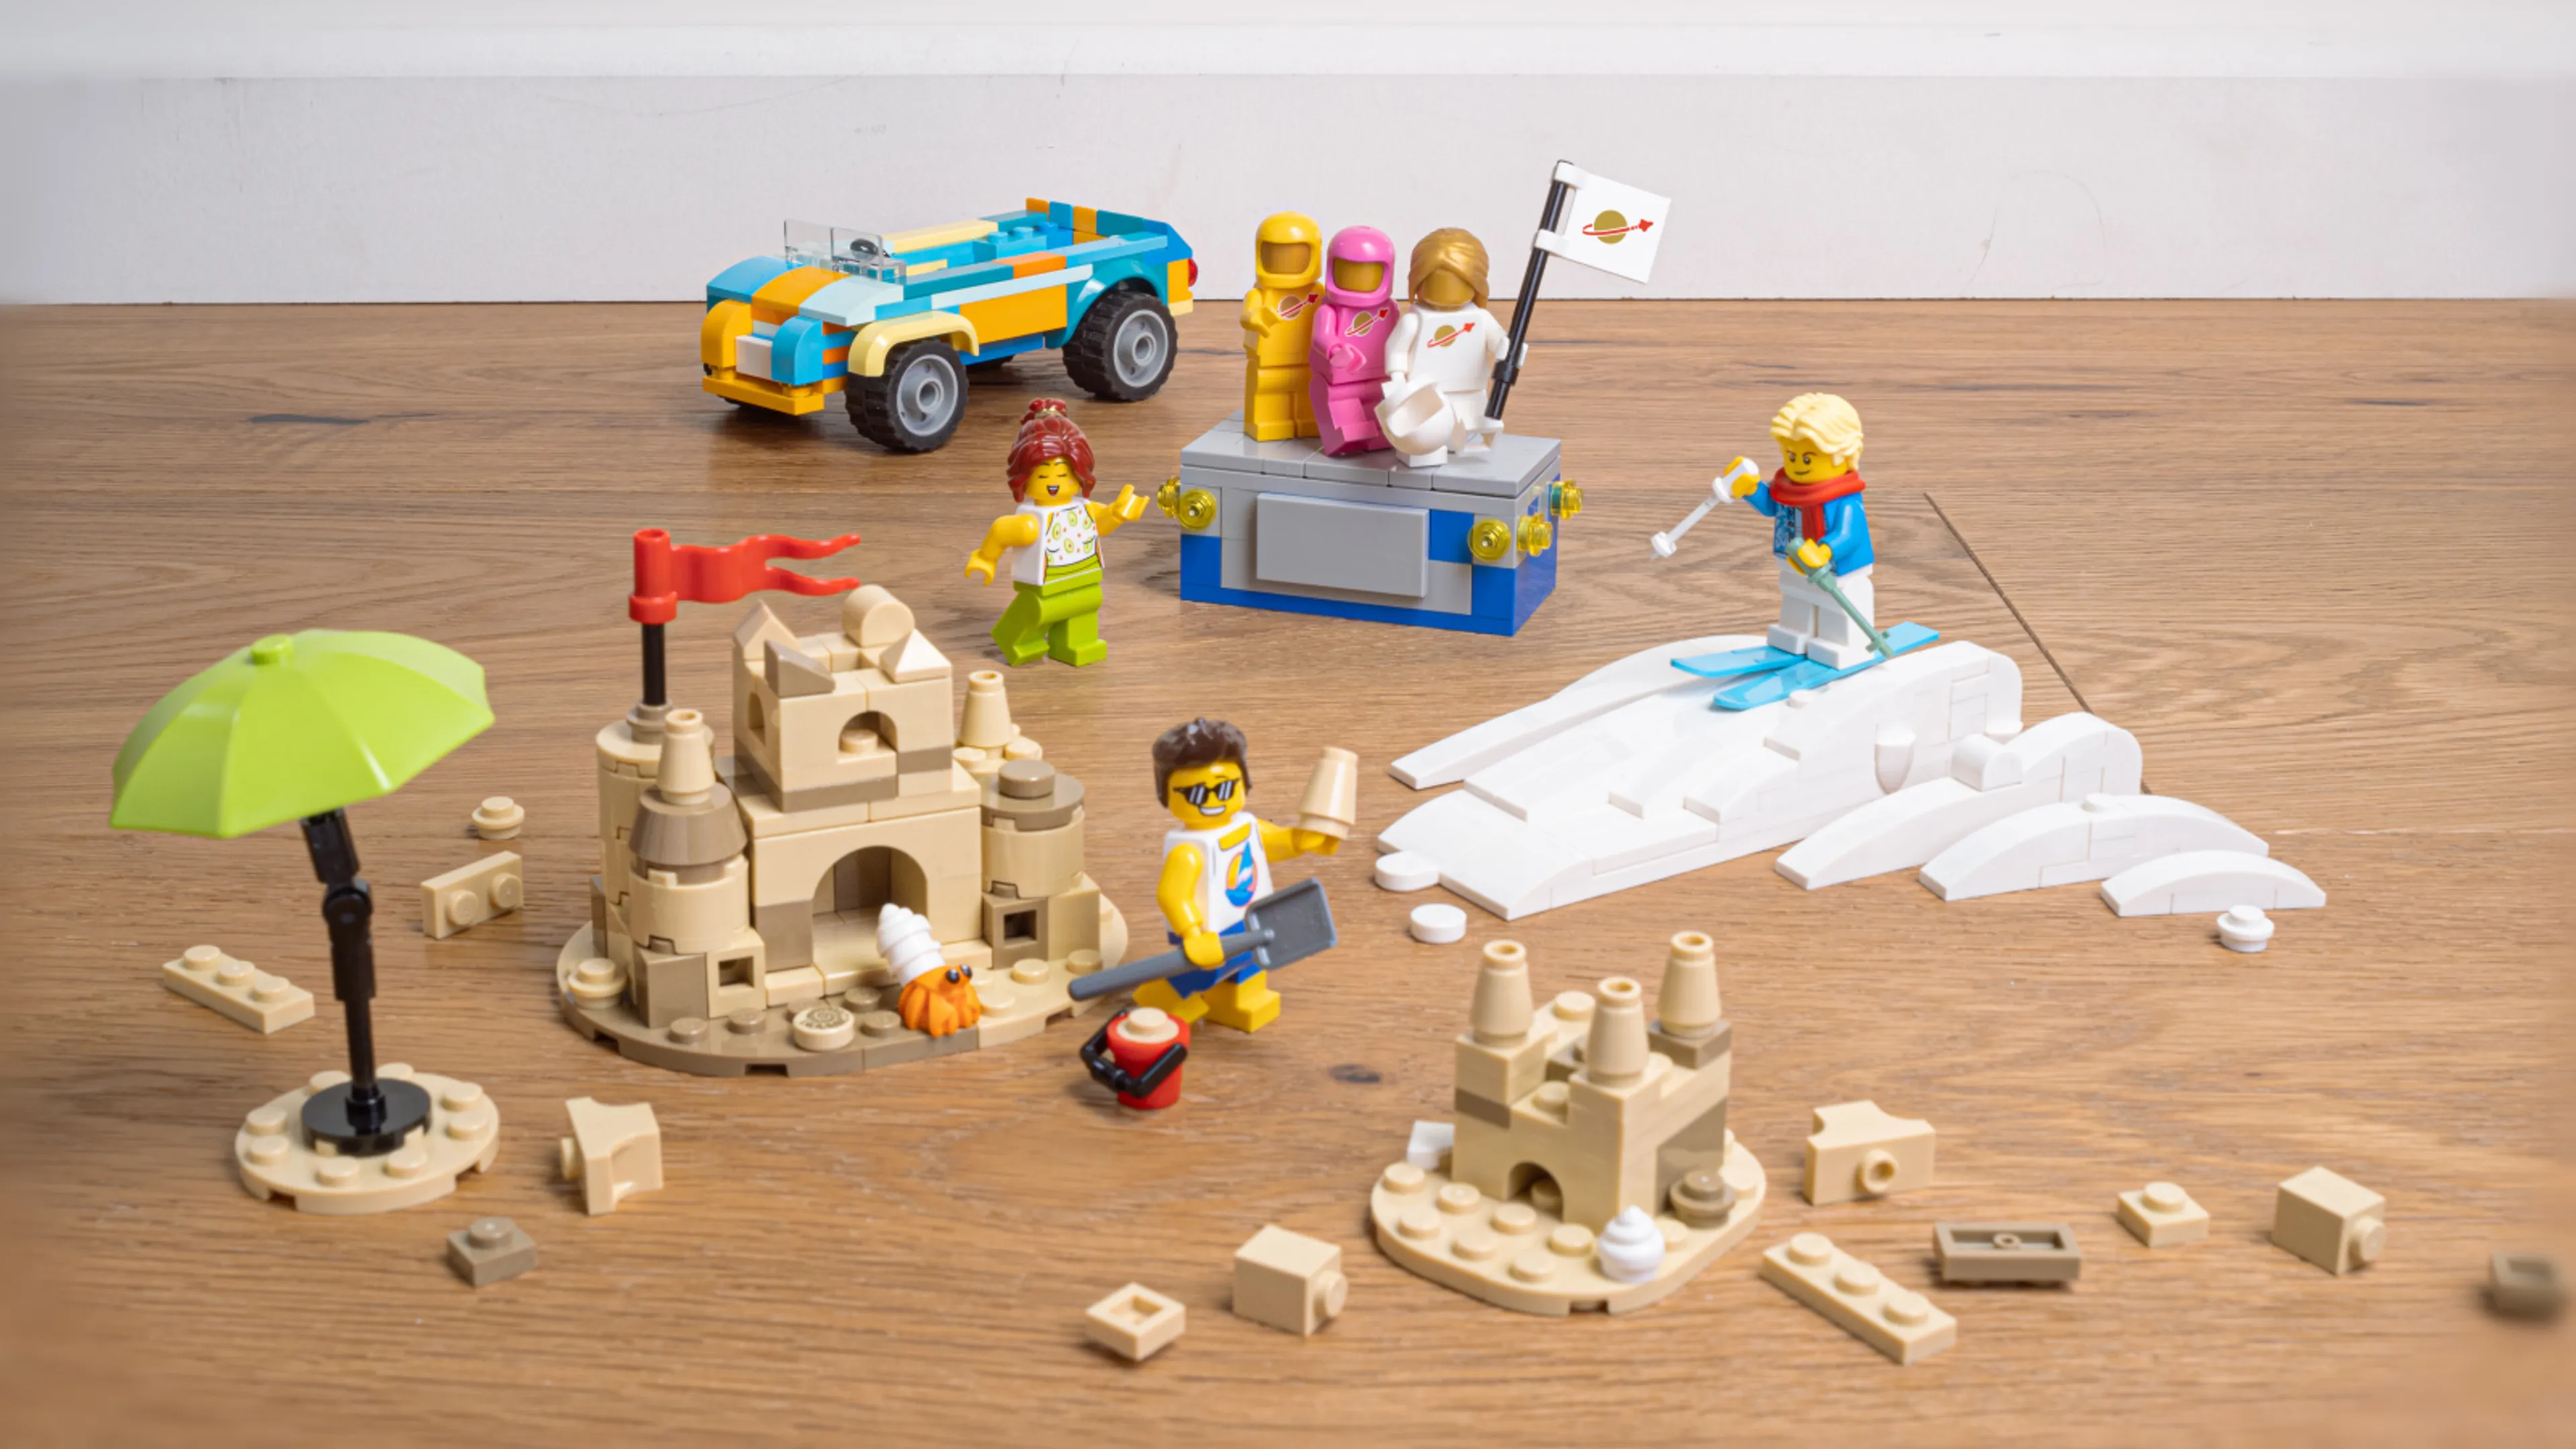 Take your friends on a LEGO® road trip